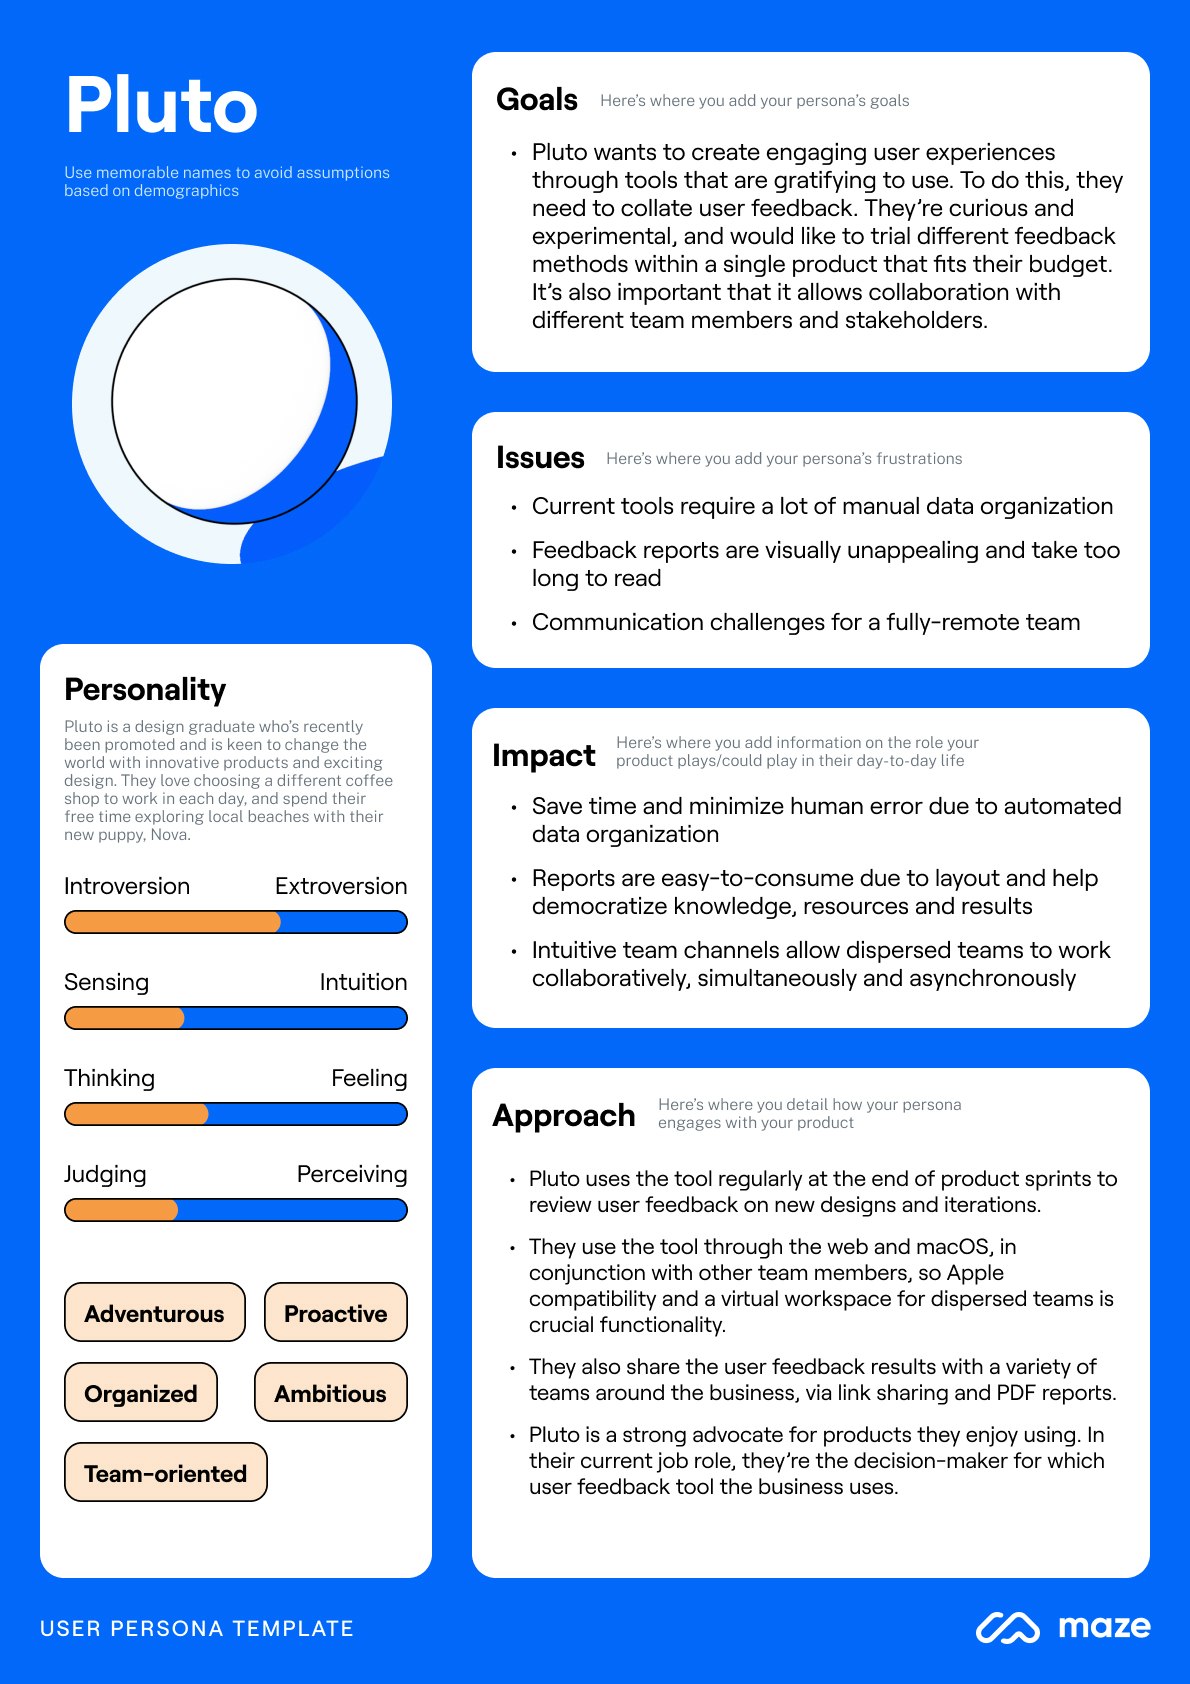 User persona profile with the name 'Pluto' and detailed information